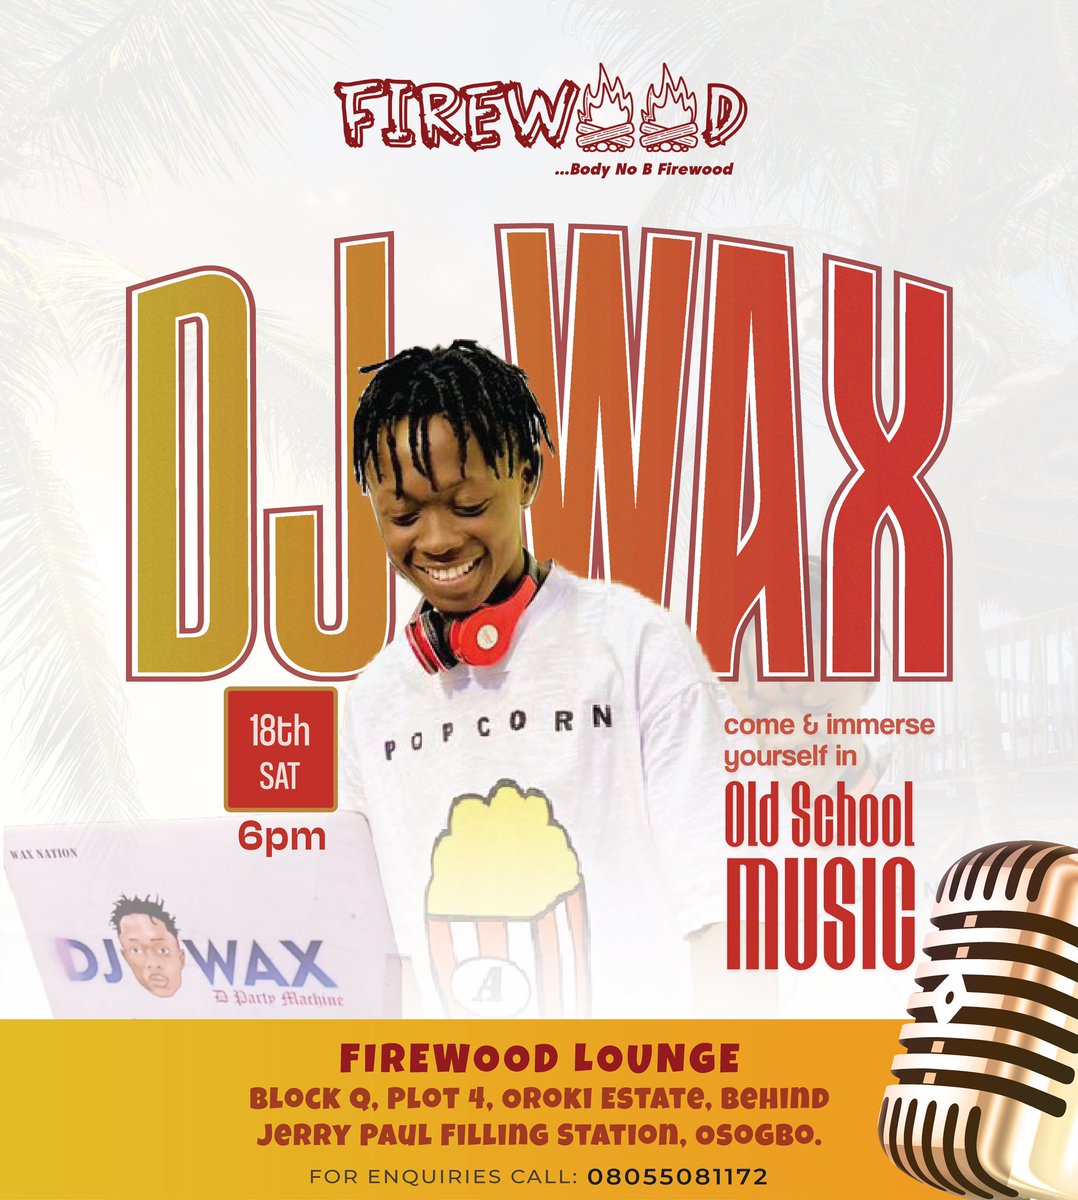 Hang out with DJ Wax this Saturday as he thrills your evening with old nostalgic music.❤️💯🔥🔥

#valentine #valentines #lounge #bar #explore #couplegoals #valentinegifts #havefun #bar #osogbolounge #osunstate #osogboparty #viralcarousel #valentinesday #gift #osogbo #NYSC